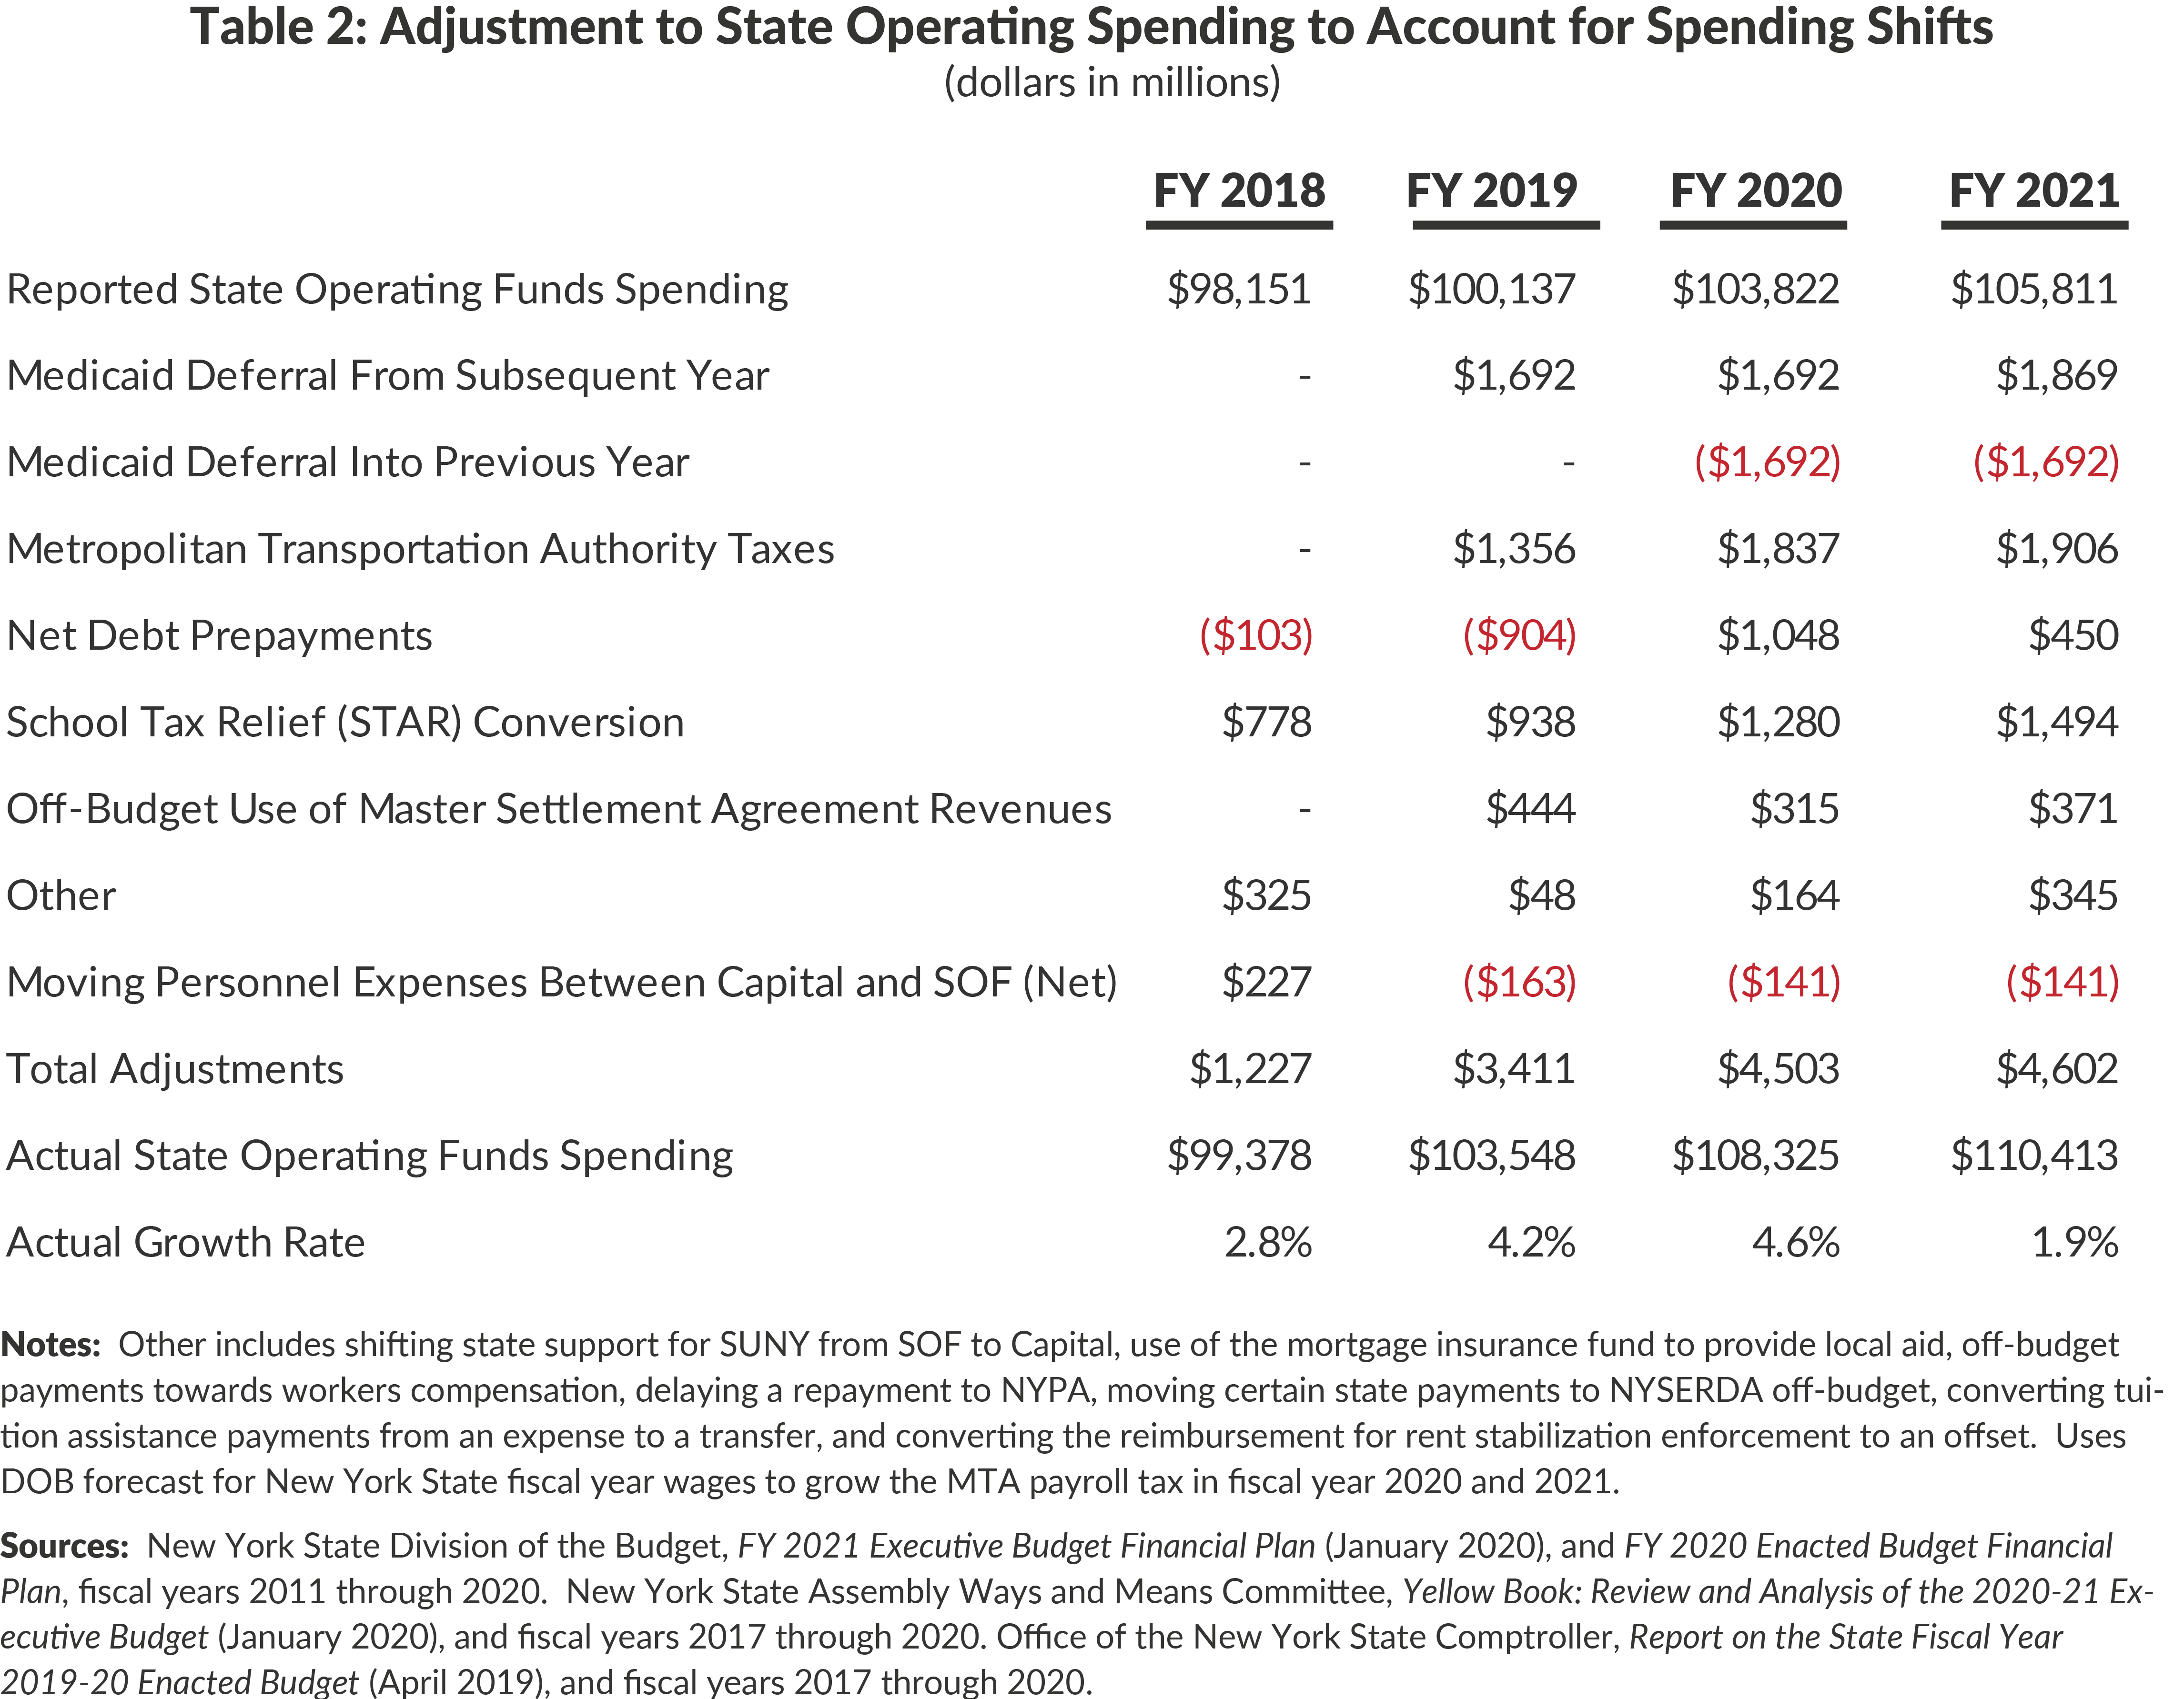 Table 2: Adjustment to State Operating Spending to Account for Spending Shifts